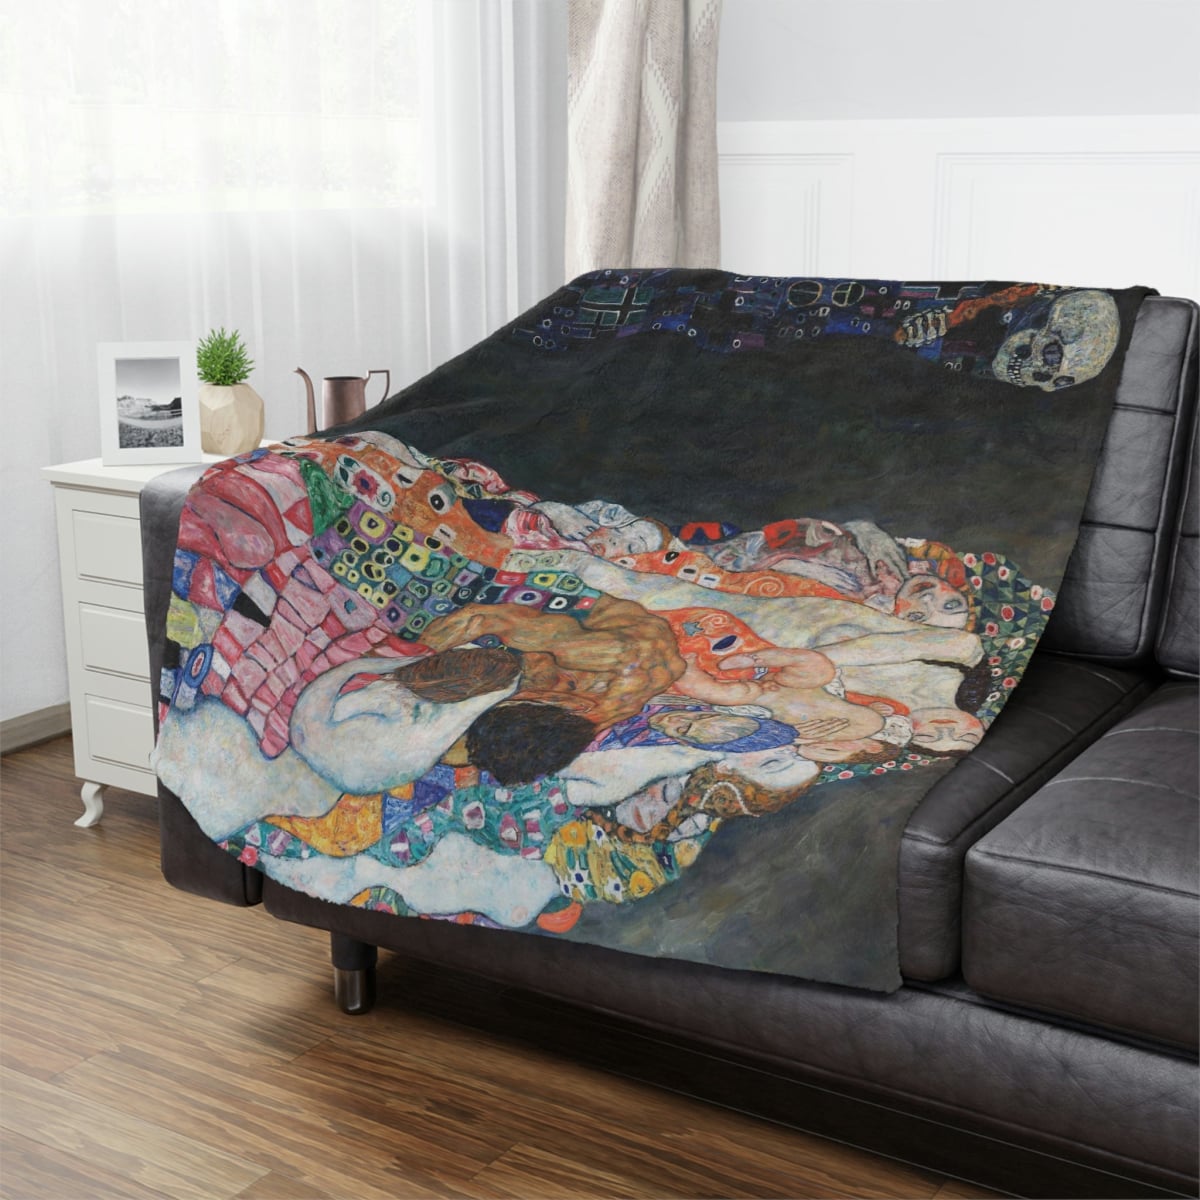 Klimt-inspired home accent: 'Death and Life' art blanket